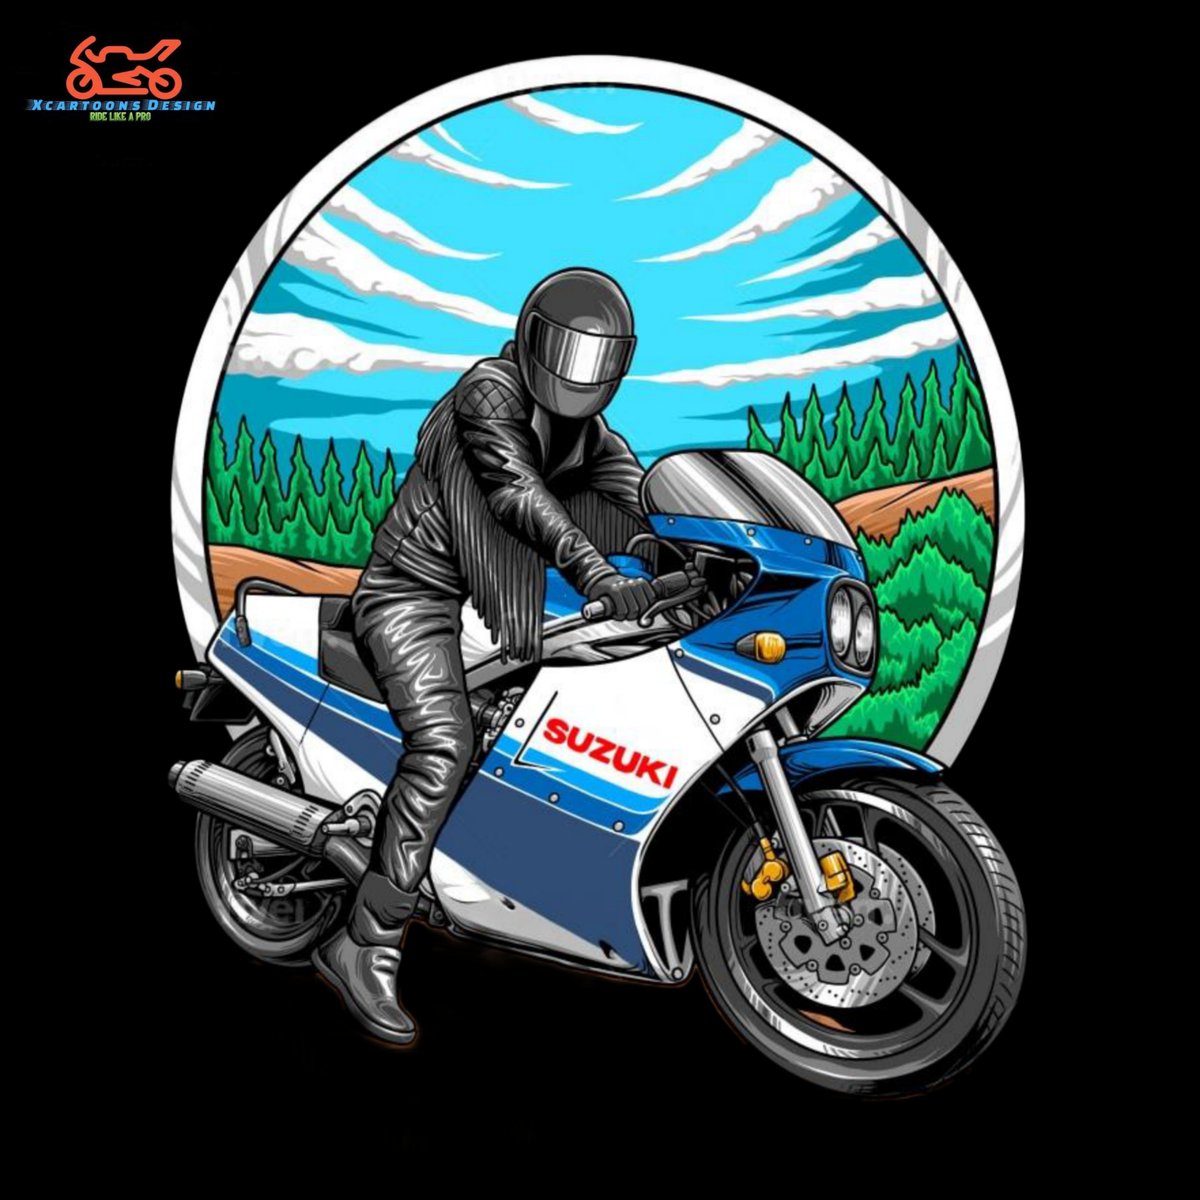 From road to sketchpad turning rides into cartoons. 

#motorcyclemaintenance #motorcyclelovers #motorcyclerally #motorcyclephotos #motorcyclerider #motorcyclestyle #motorcyclesbr #motorcyclebag #motorcycletherapy #motorcycleapparel #motorcycletraining #motorcyclemechanic #USA